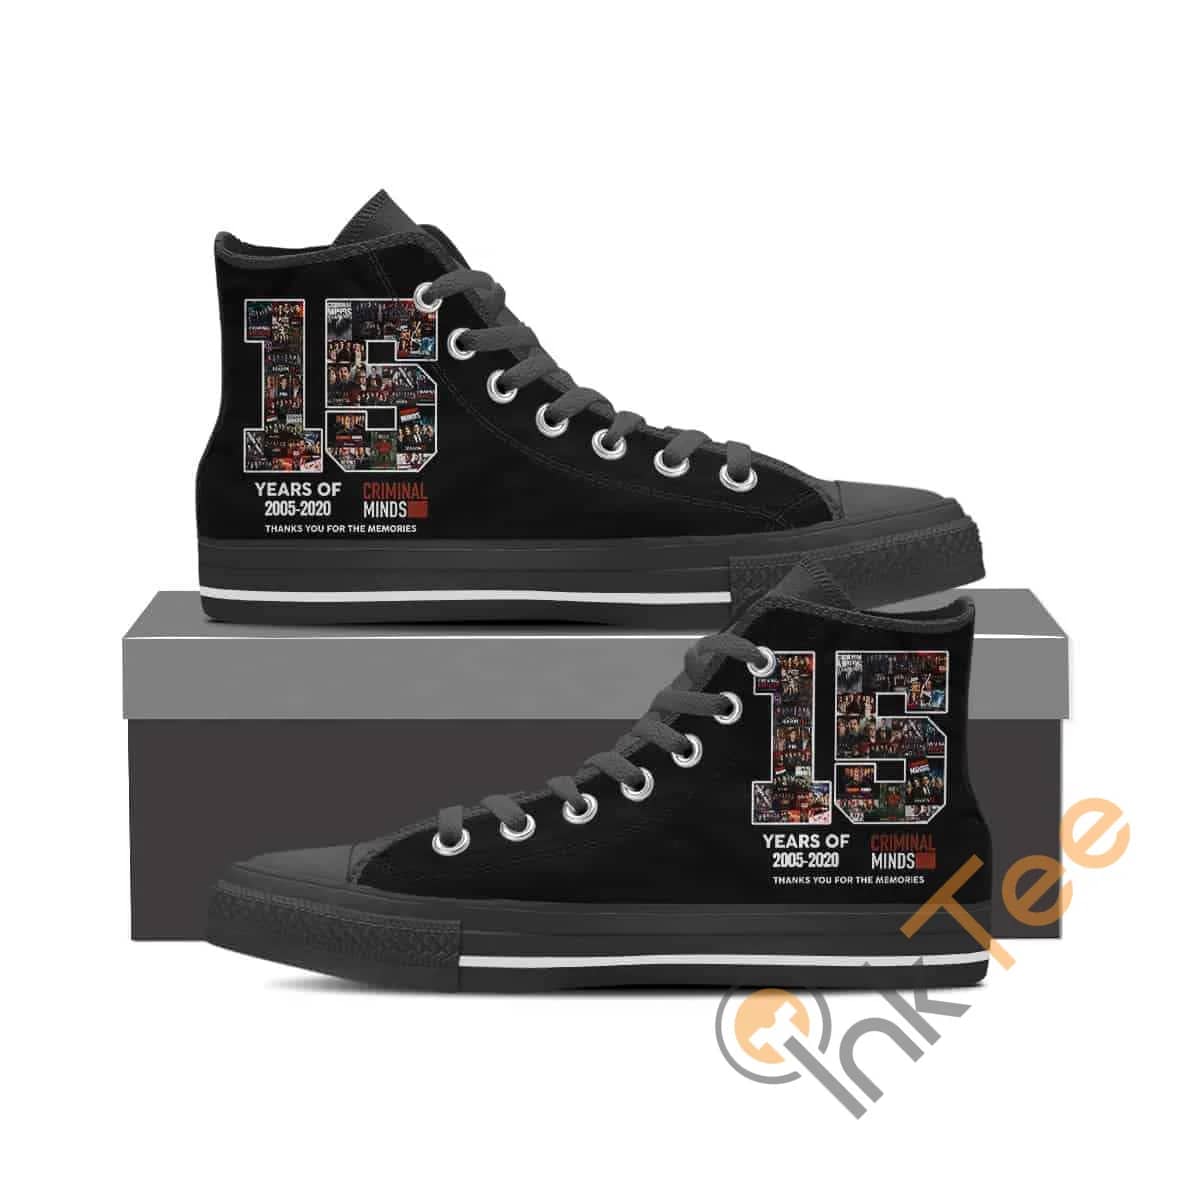 Criminal Minds 15 Years Amazon Best Seller Sku 1440 High Top Shoes